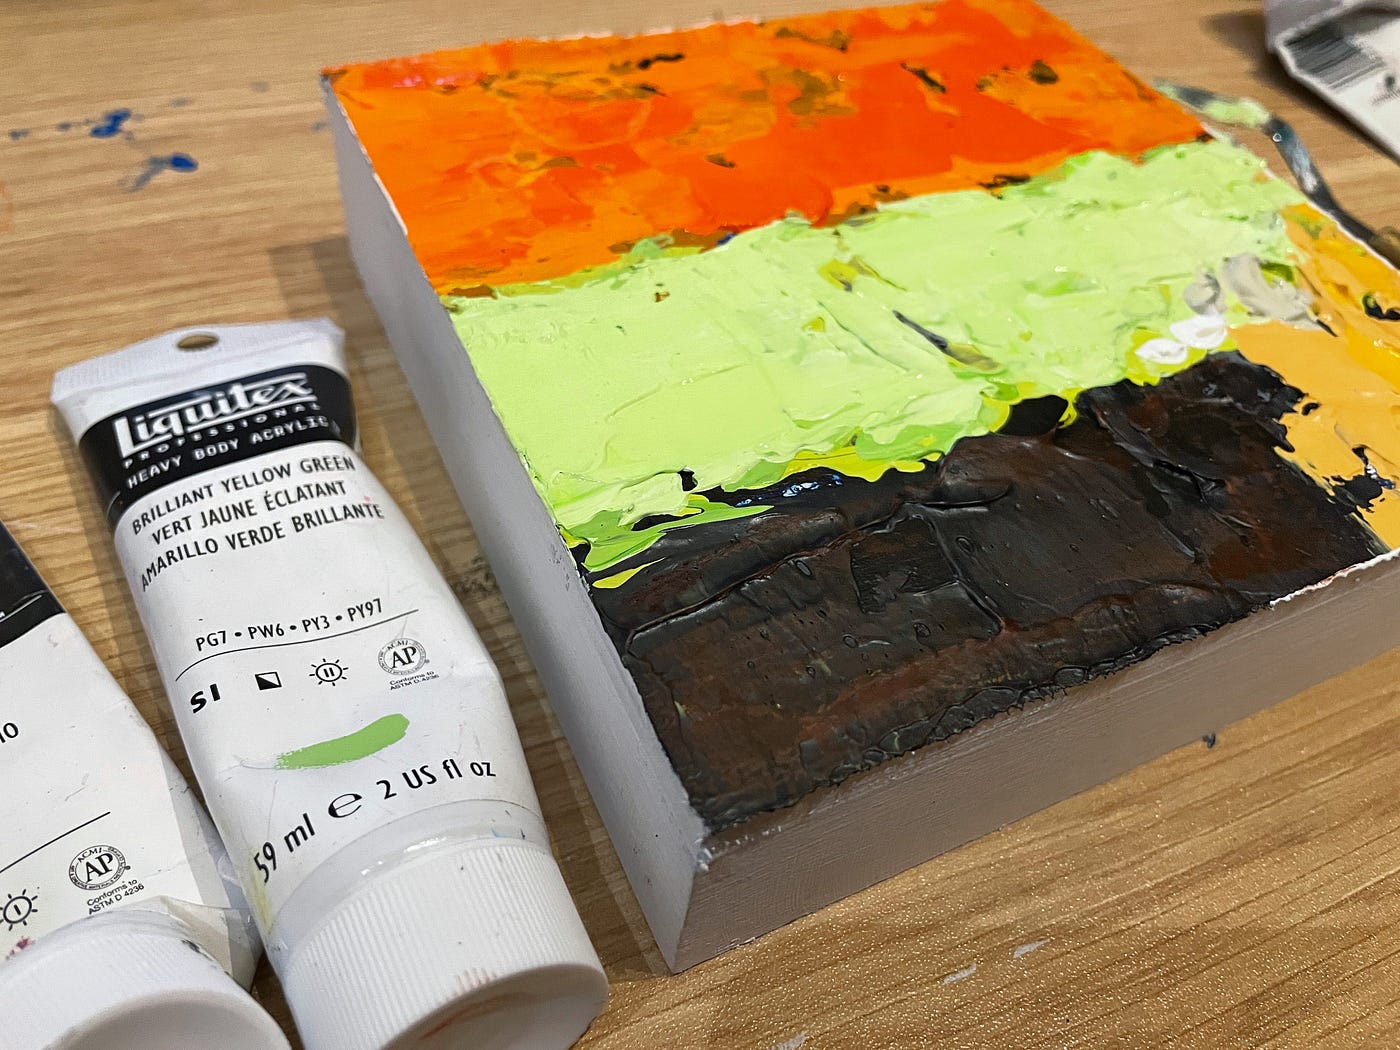 Learn How to Seal and Prime a Wood Panel for Acrylic Painting, by George  Marklow, Counter Arts